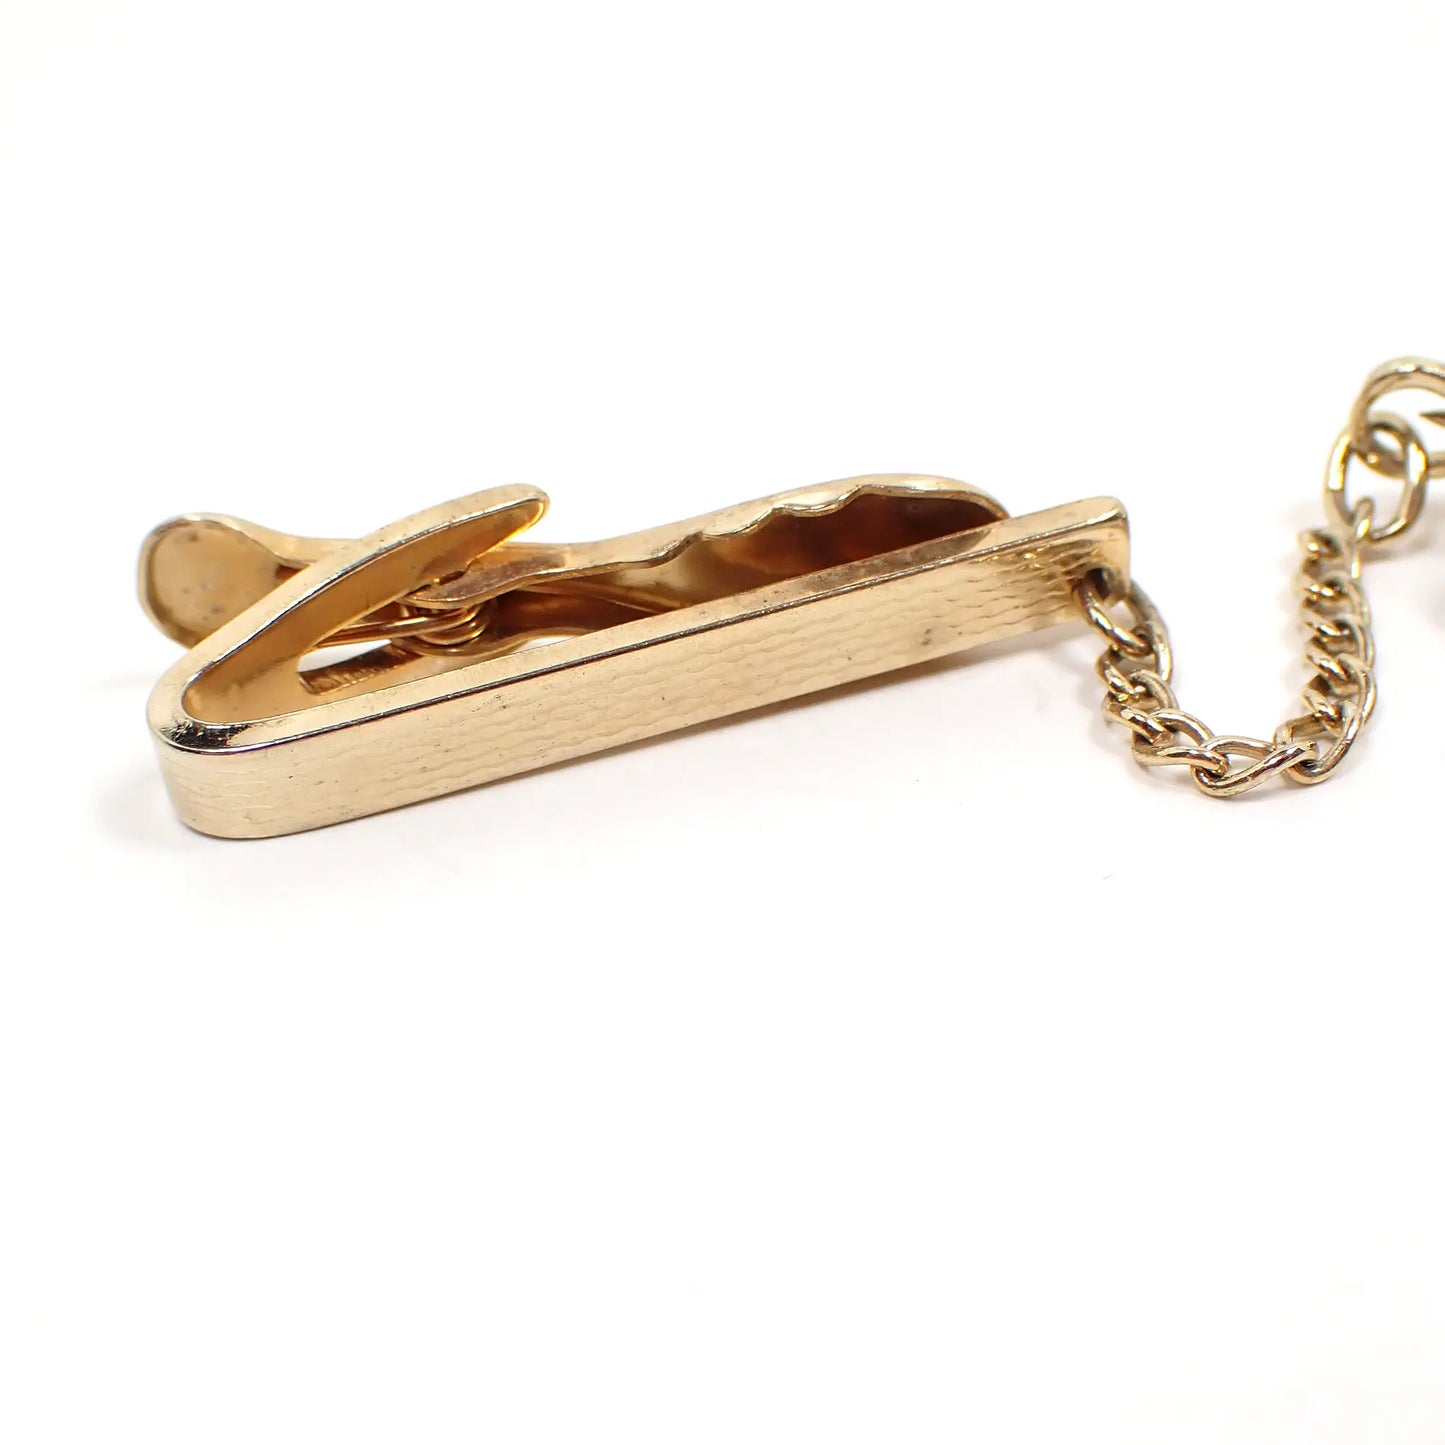 Hickok Two Tone Mid Century Vintage Tie Clip Clasp with Attached Initial Letter S Tie Tack